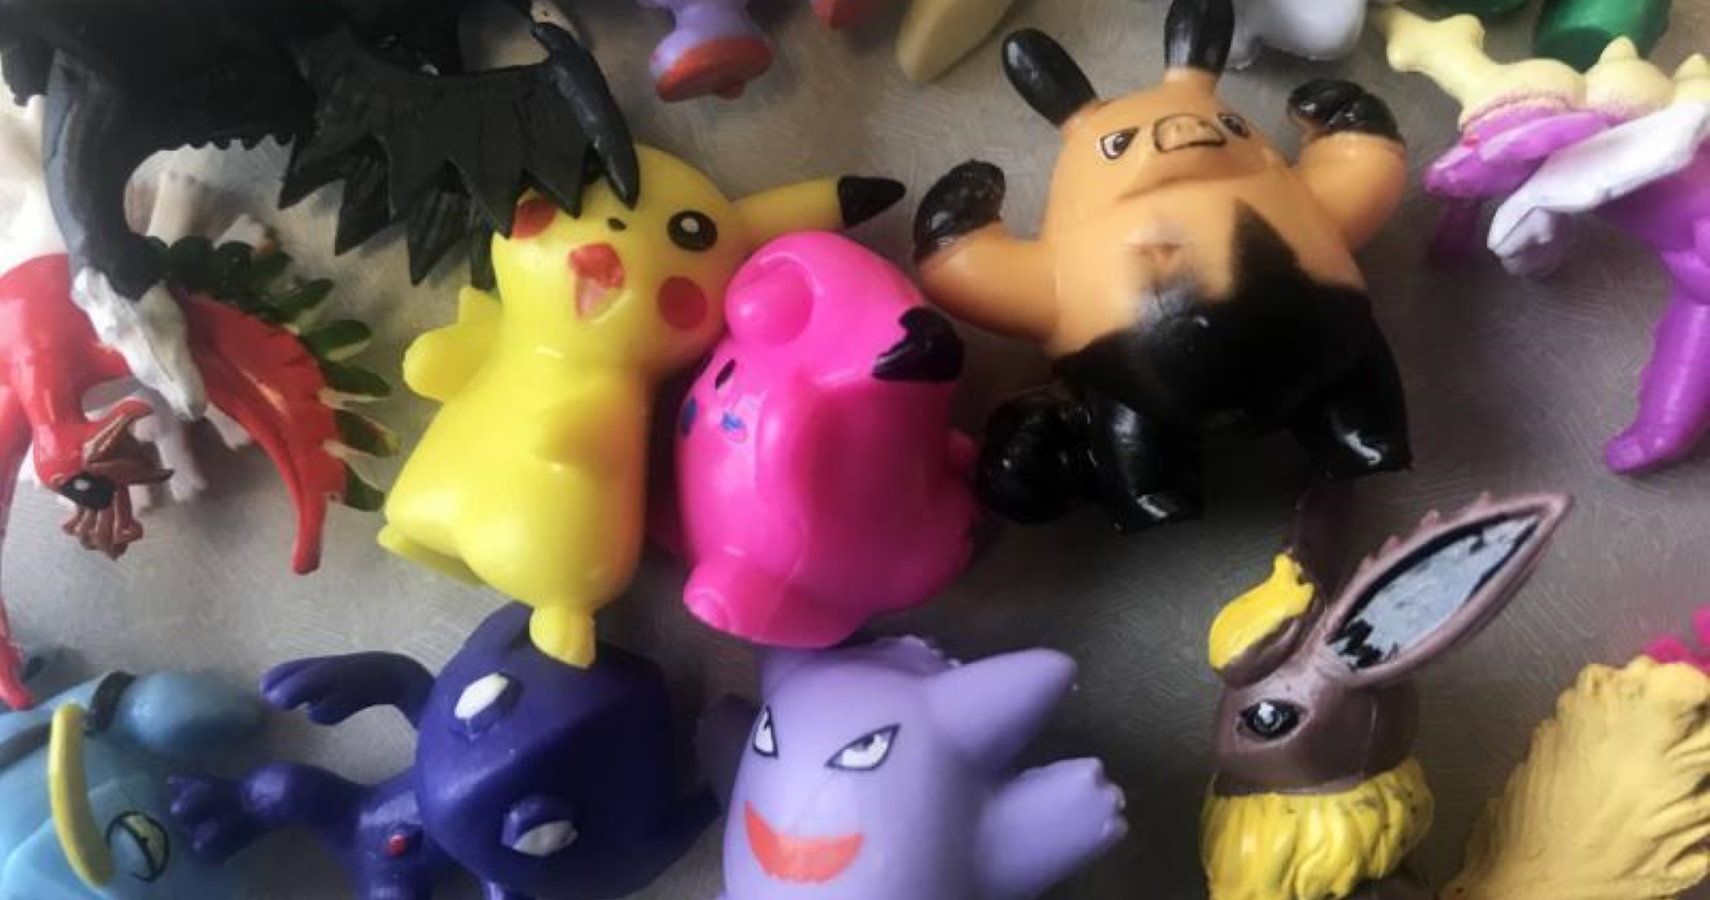 More Than 86,000 Fake Pokémon Figures Were Seized By US Border Officials This Month